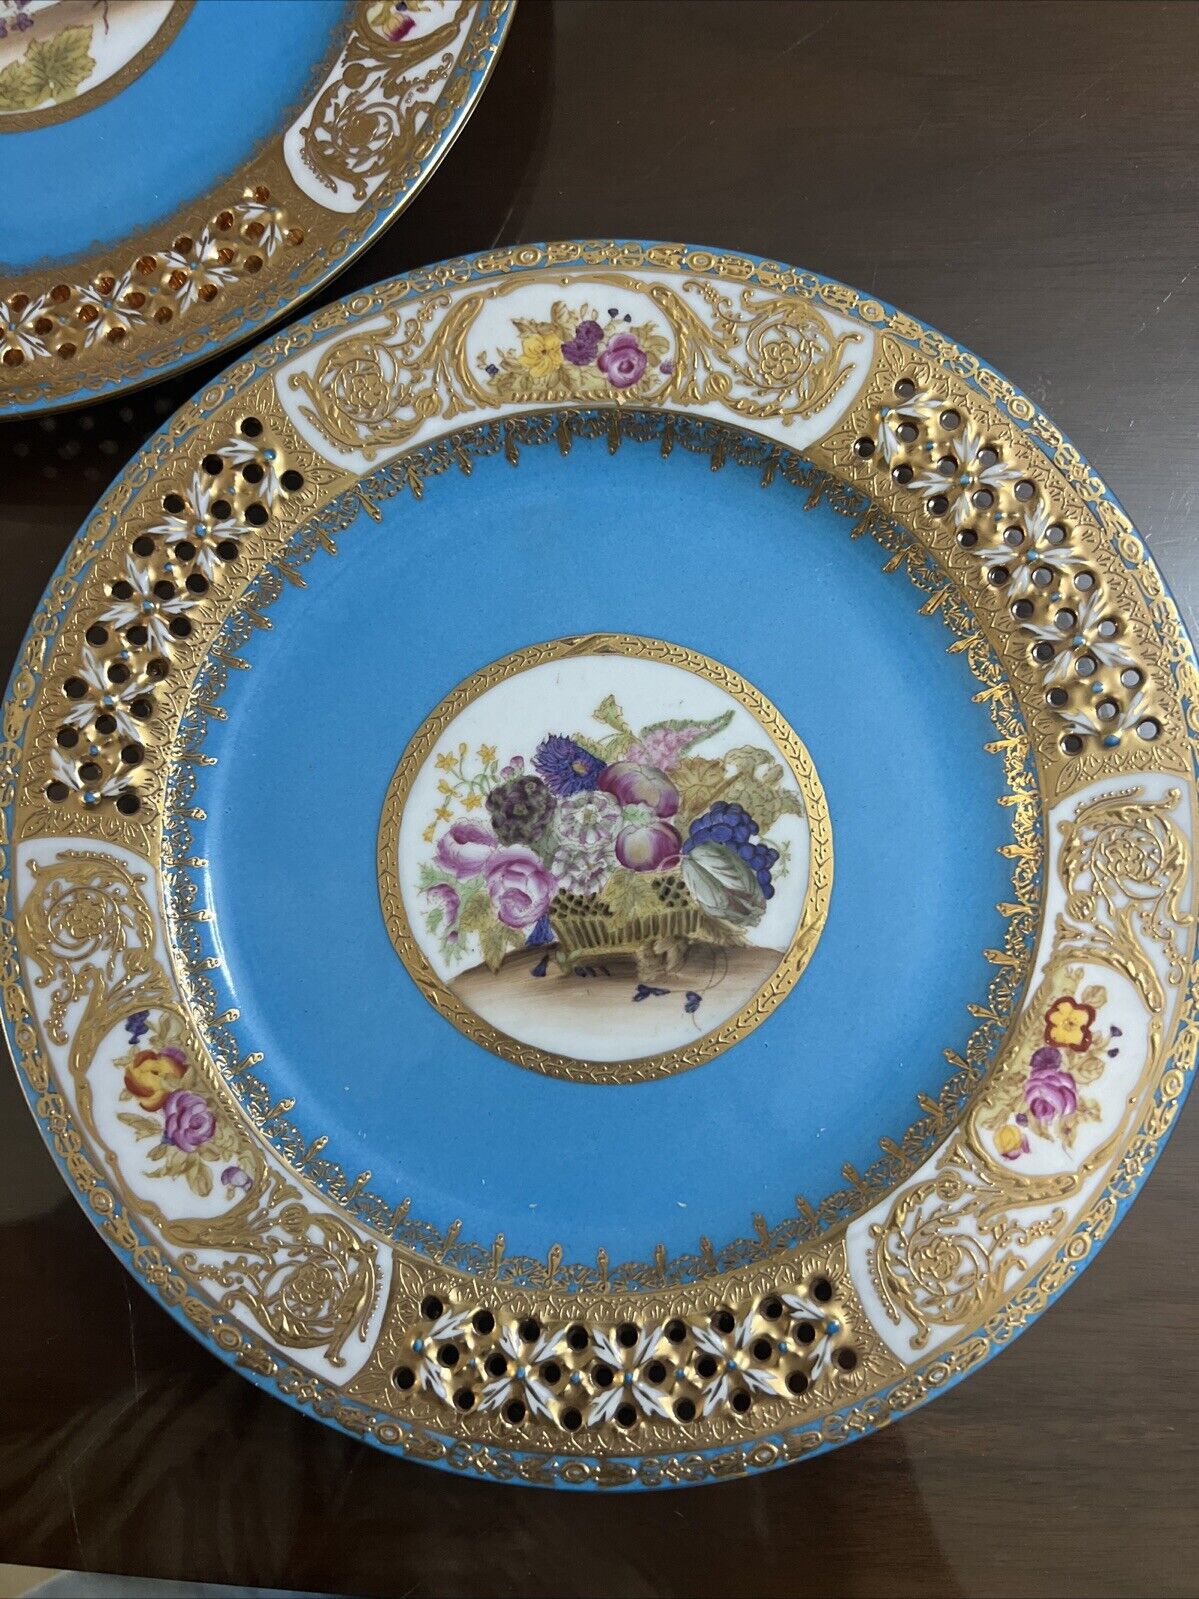 Antique Sevres Style Reticulated Floral Plates Minty Condition 10”Marked Limoges